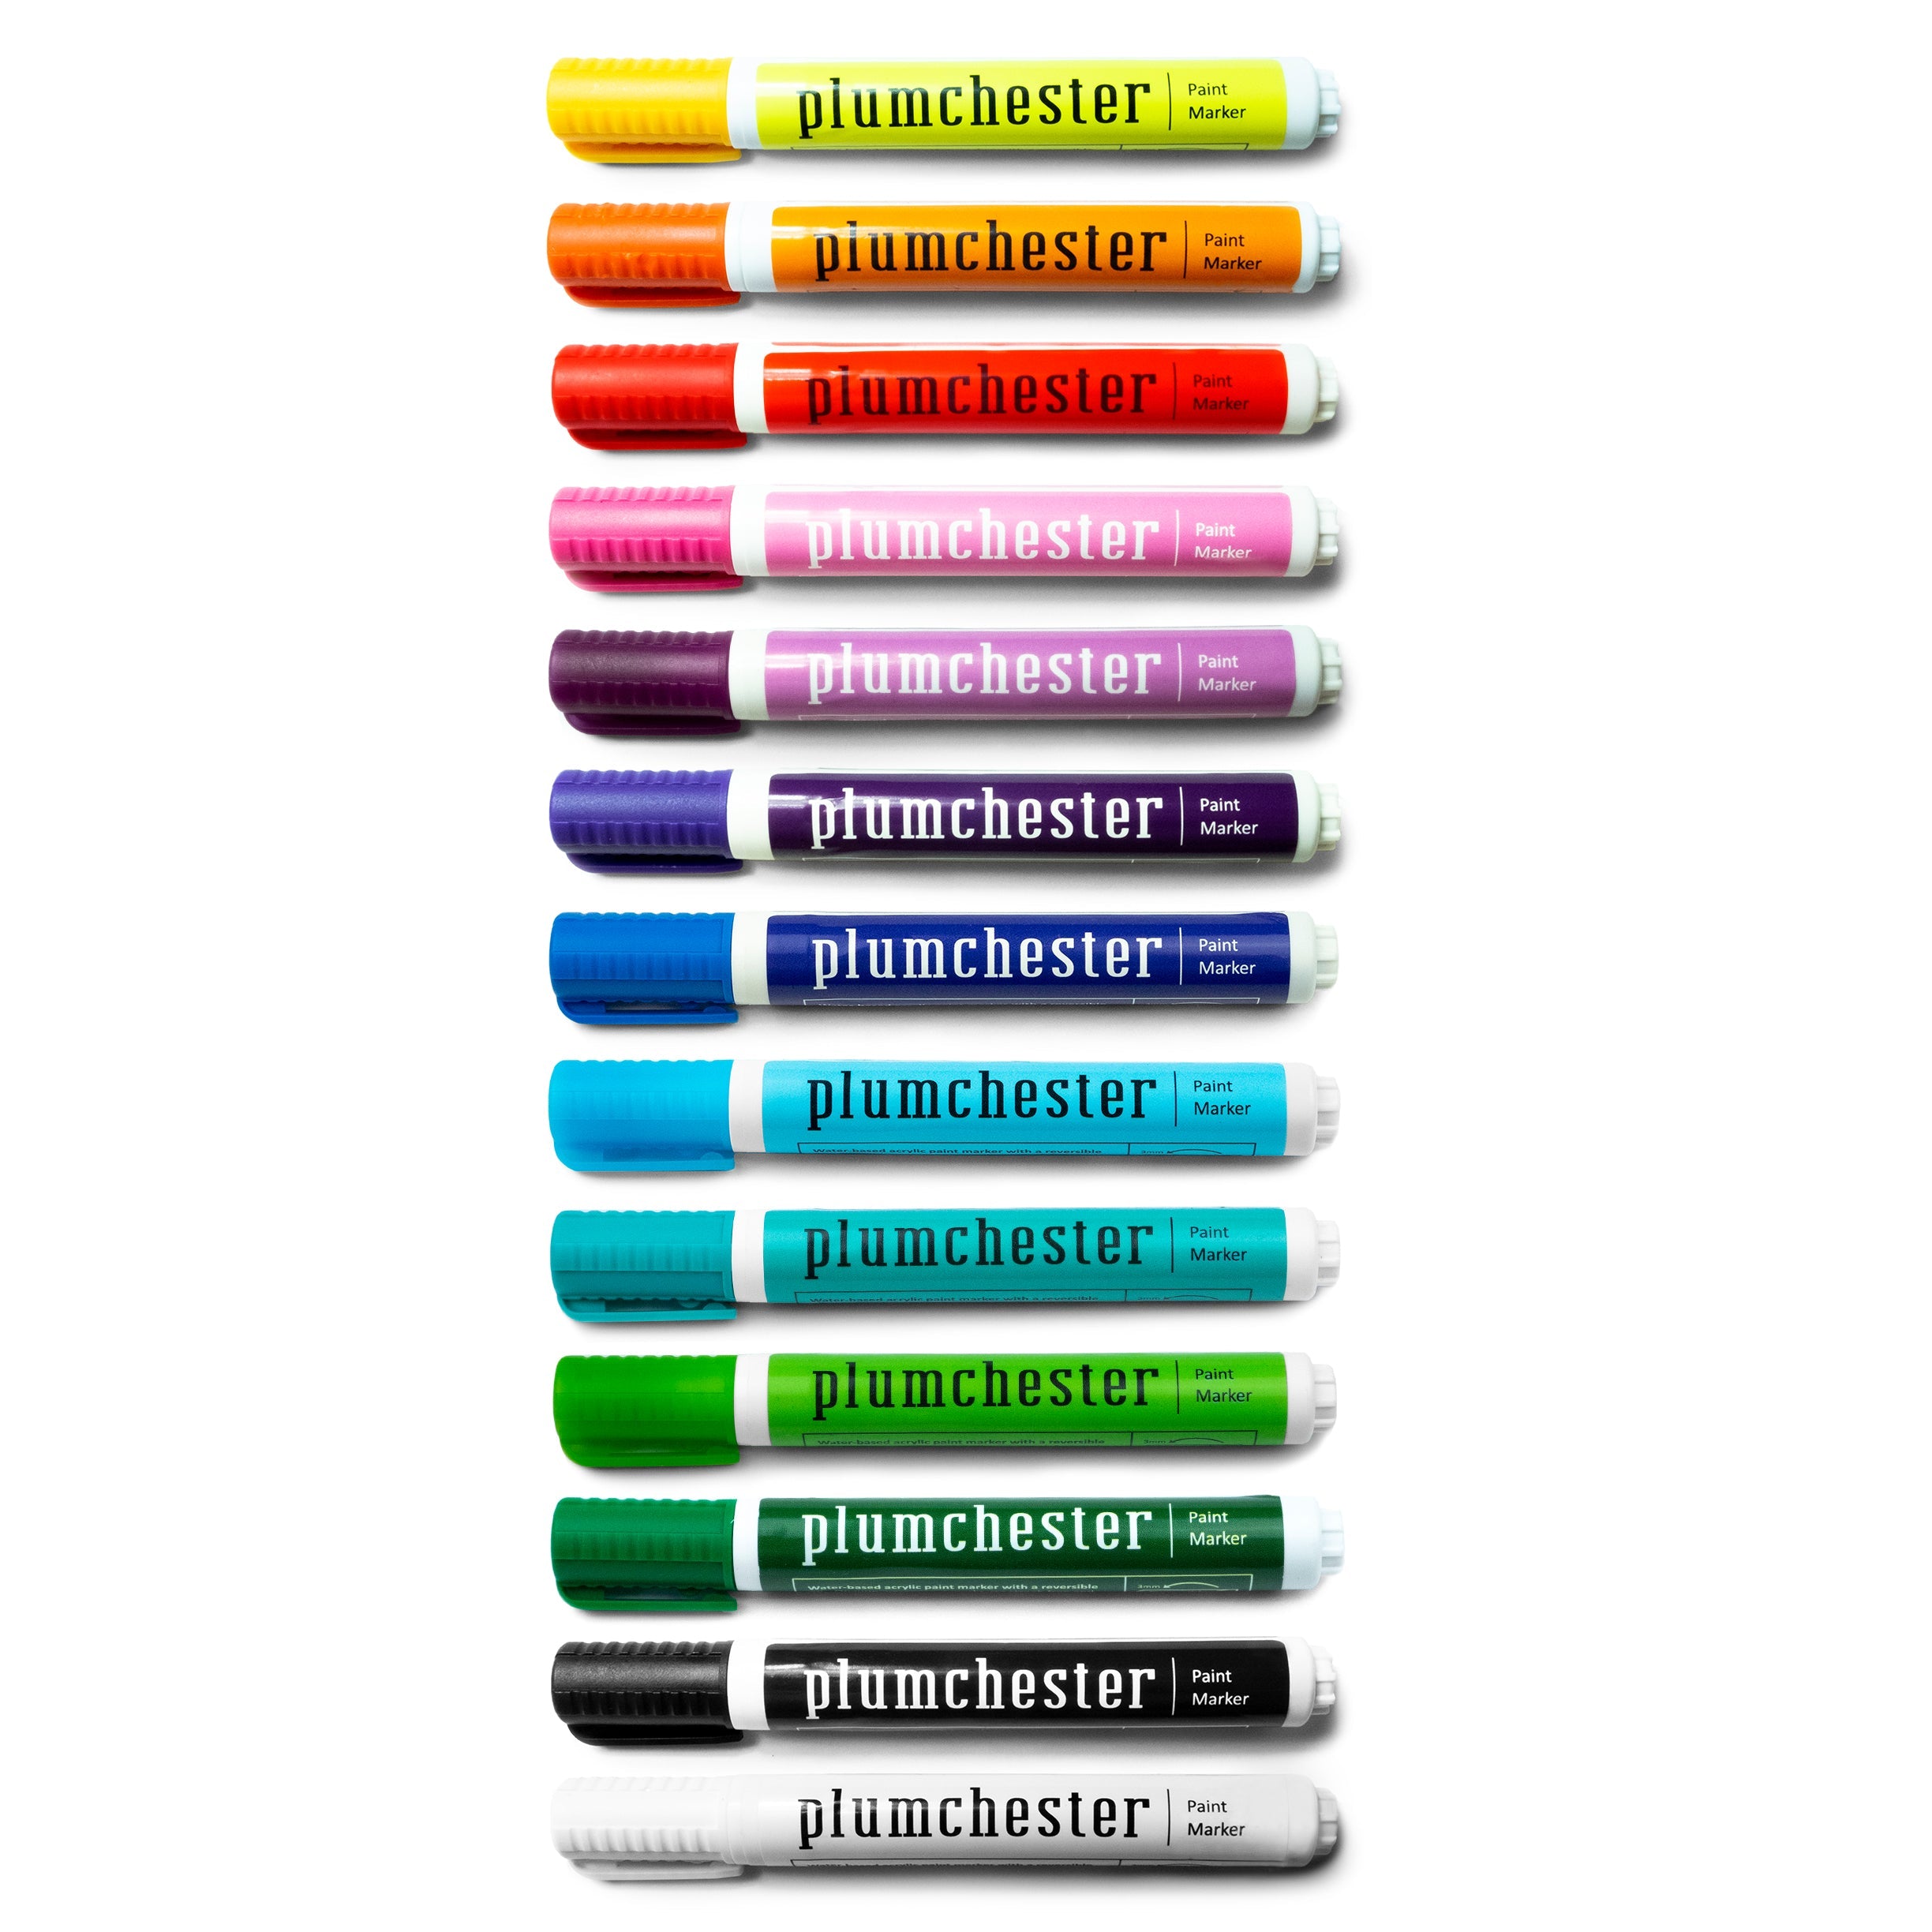 Plumchester Paint Markers, Bundle of 13